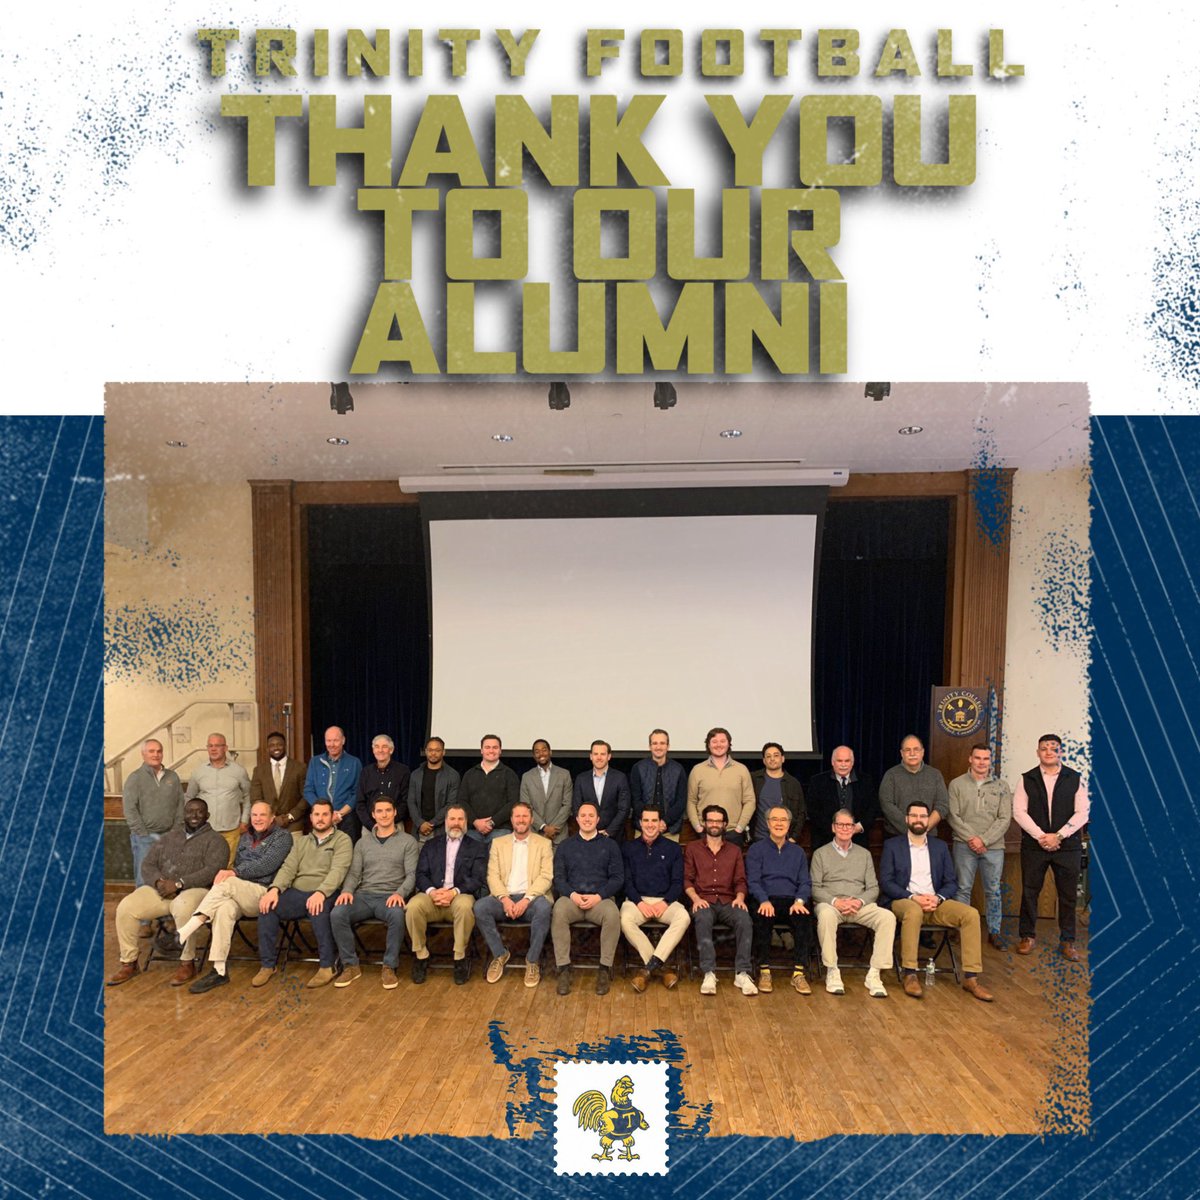 Had a great time at our Alumni Networking event this past Saturday! Thank you to our 30+ alumni who came back to talk about their current roles and provide some advice to our current players when choosing a career! #RollBants #TrinColl